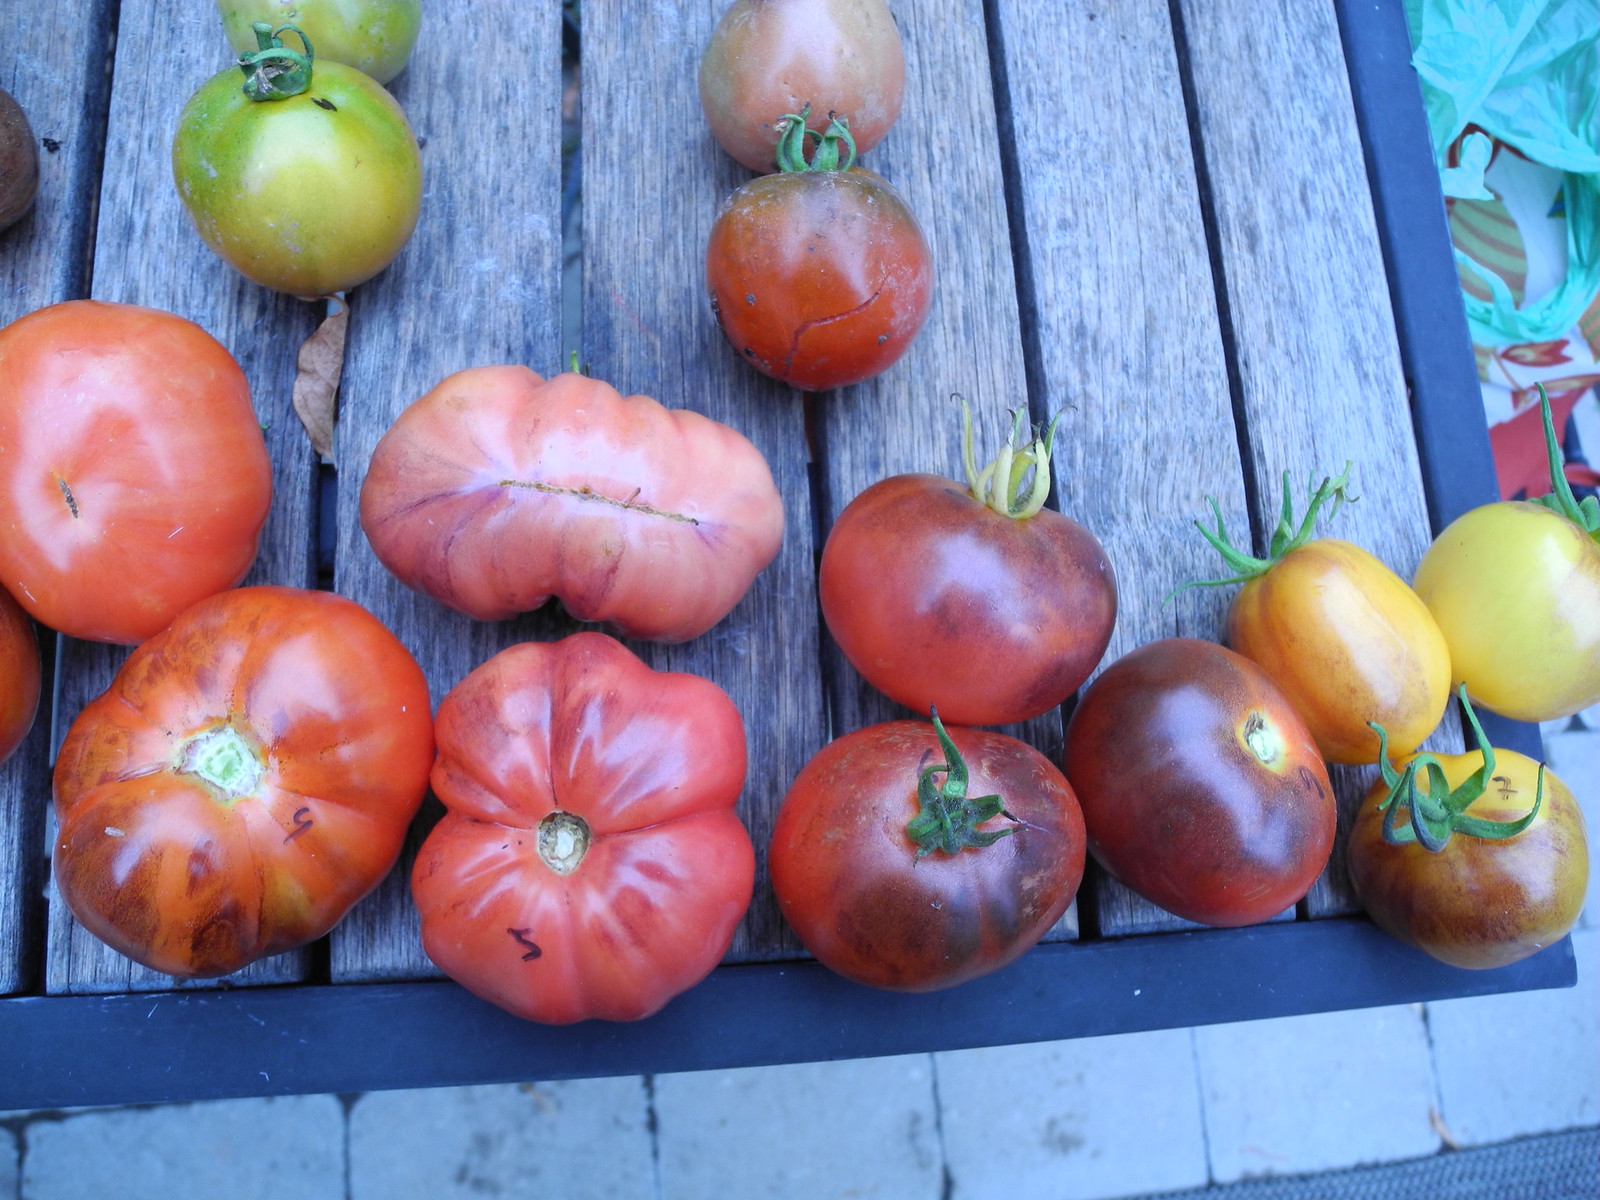 Tomatoville - An Online Community for Passionate Tomato Growers Around the World!